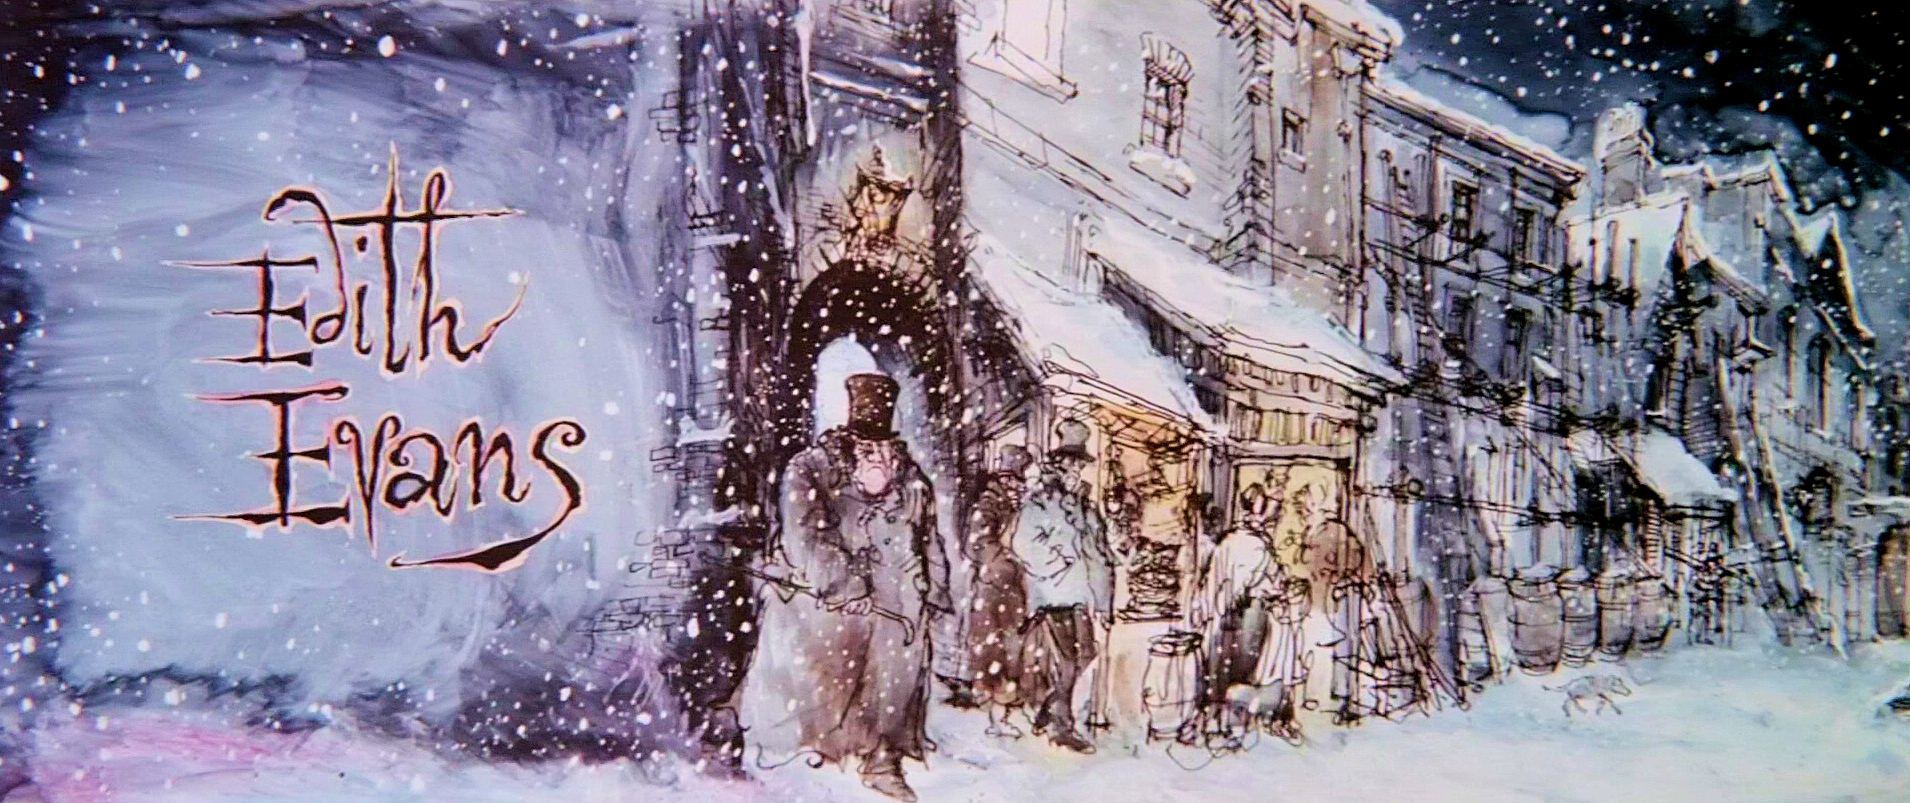 Main title from Scrooge (1970) (6). Edith Evans